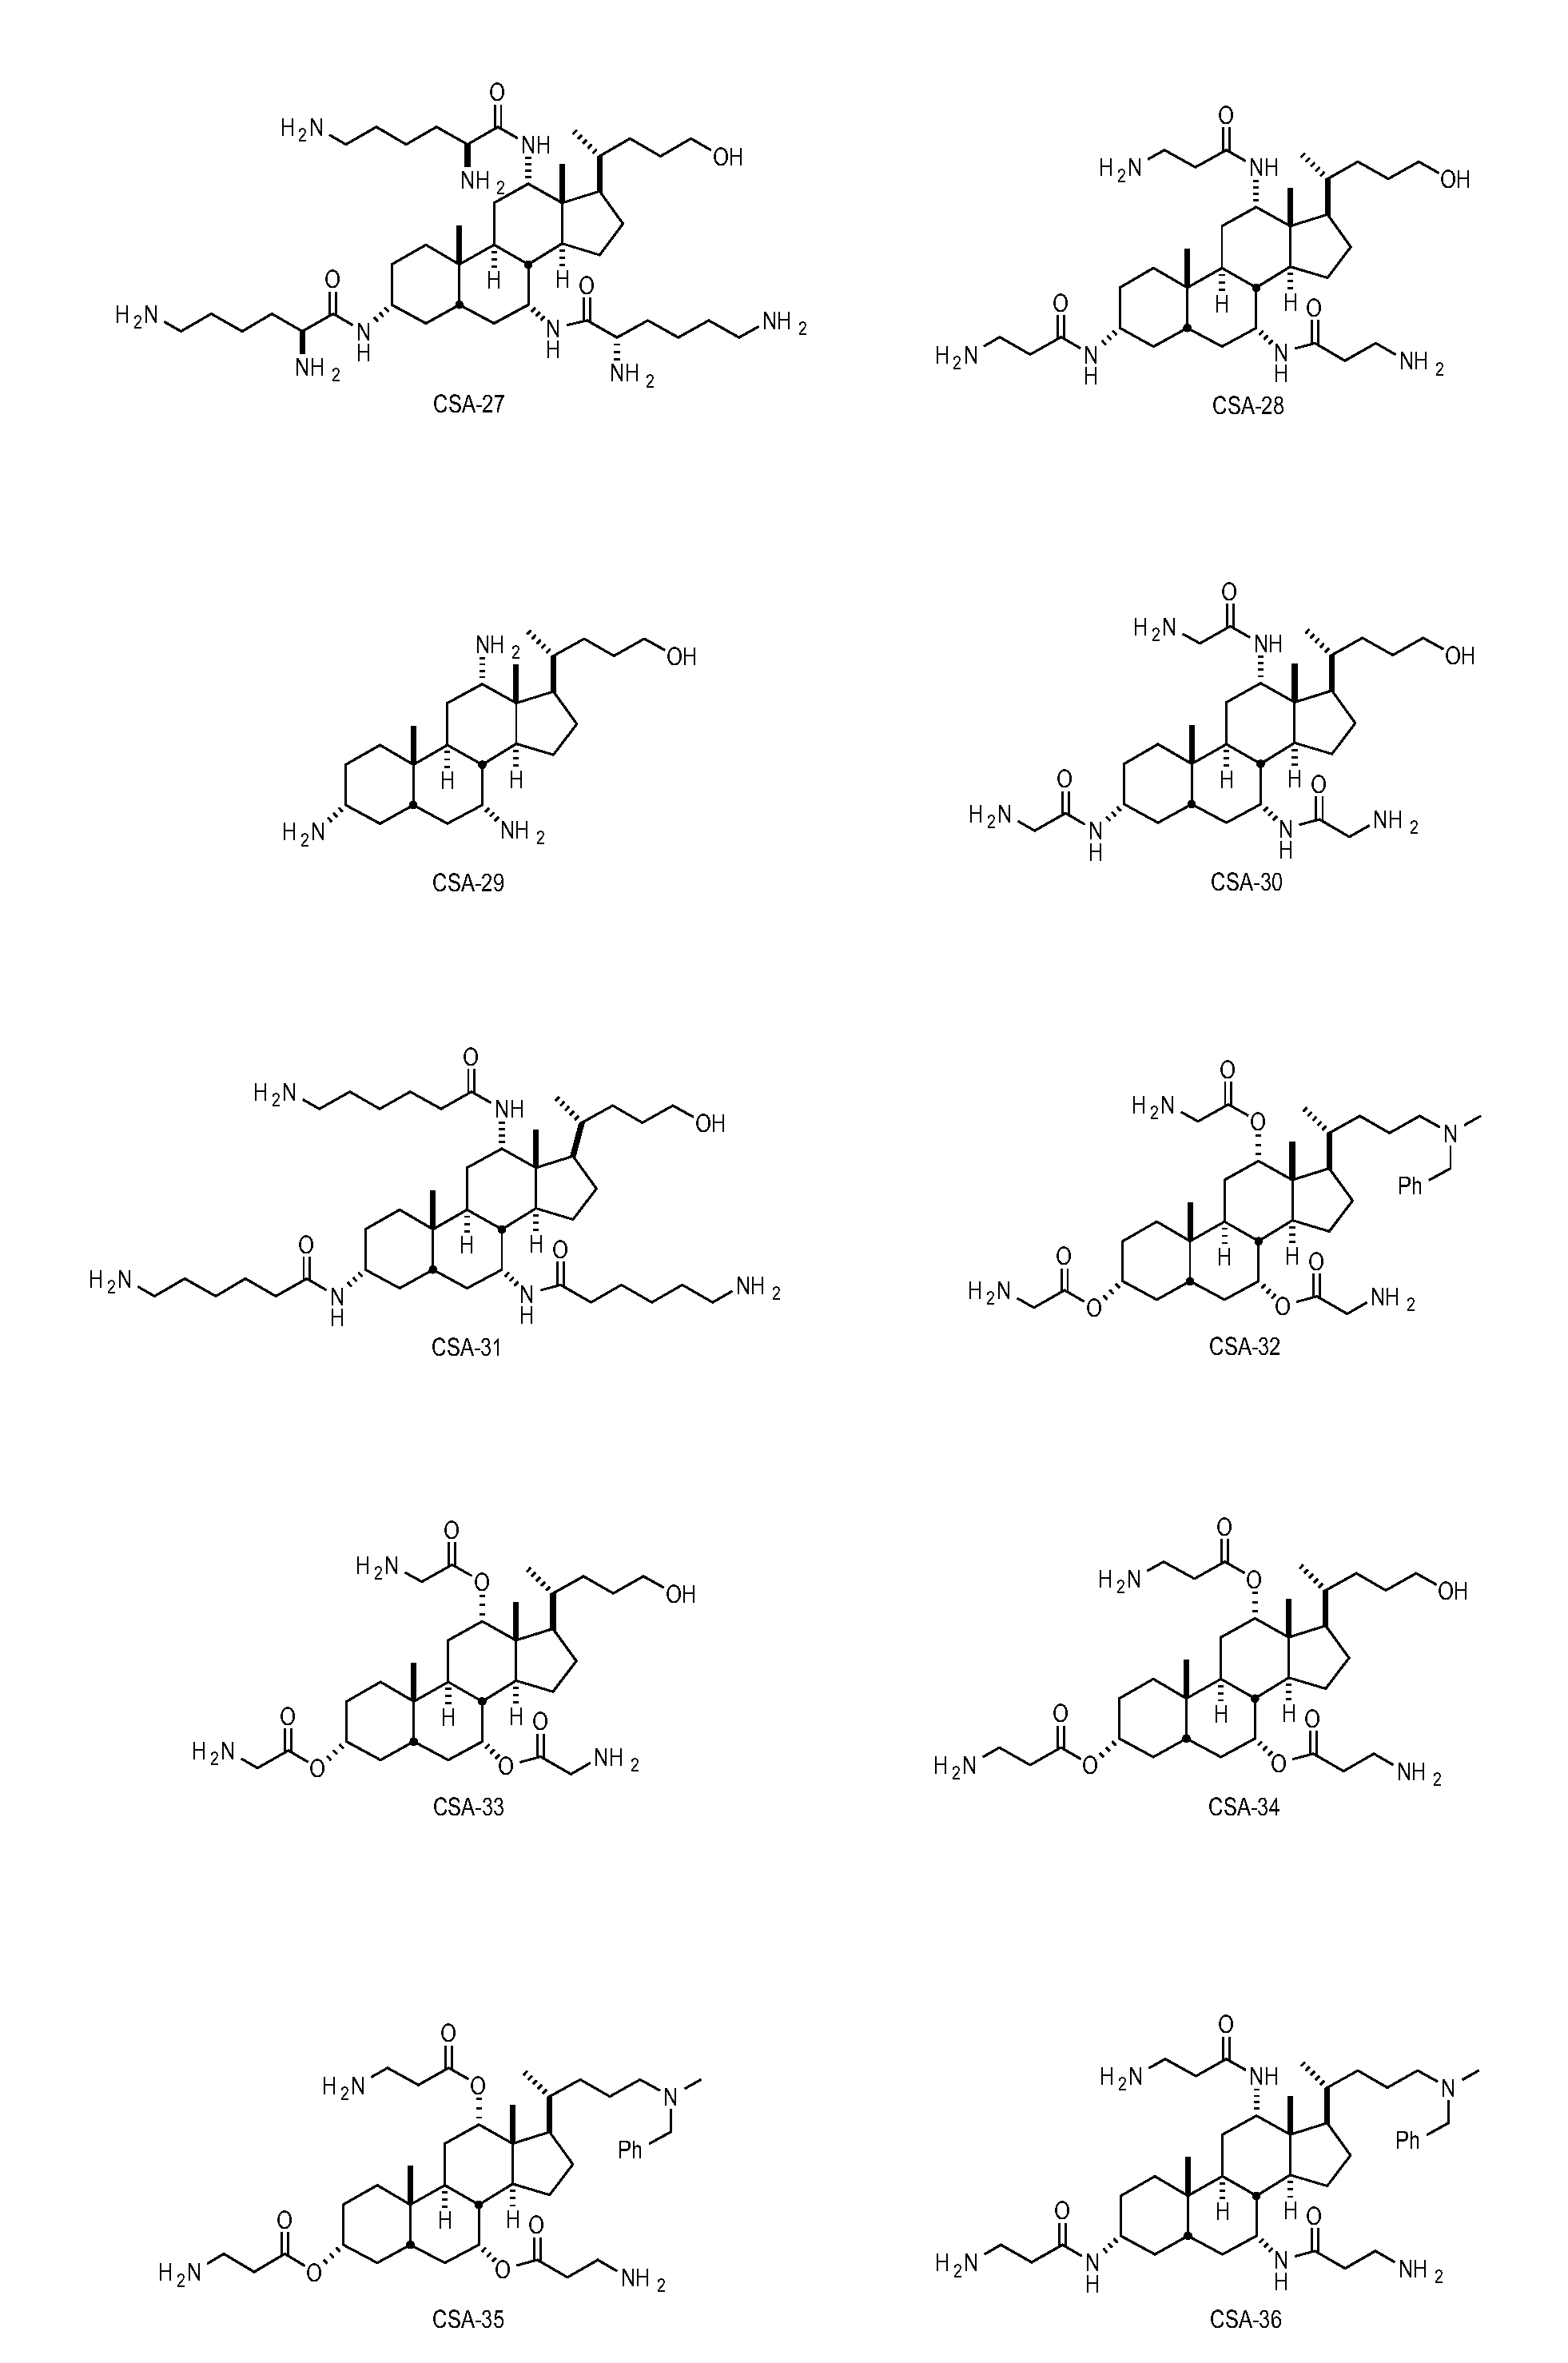 Storage-stable, Anti-microbial compositions including ceragenin compounds and methods of use